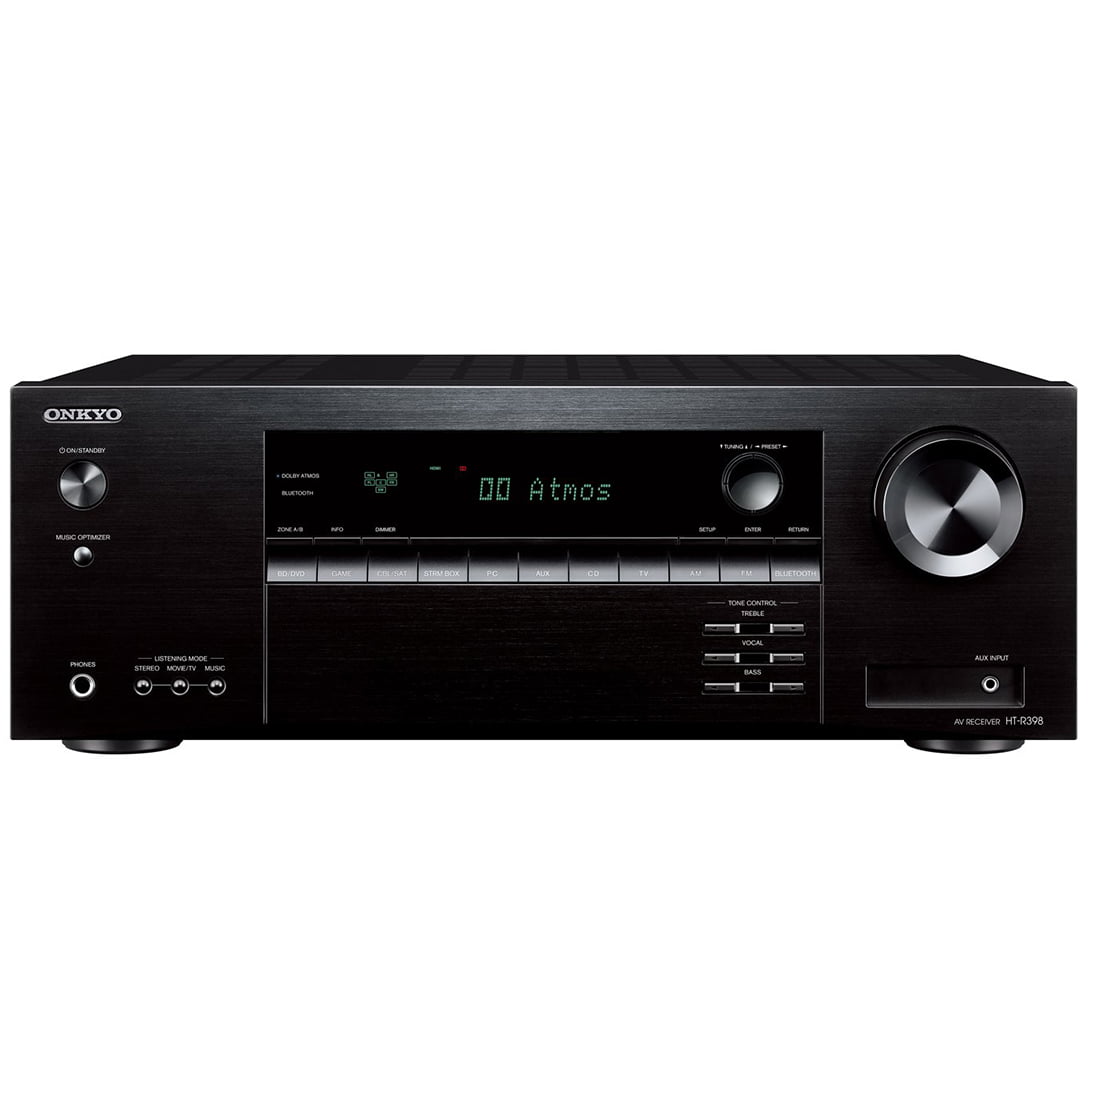 Onkyo HT-S3910 5.1 Channel Home Theater System